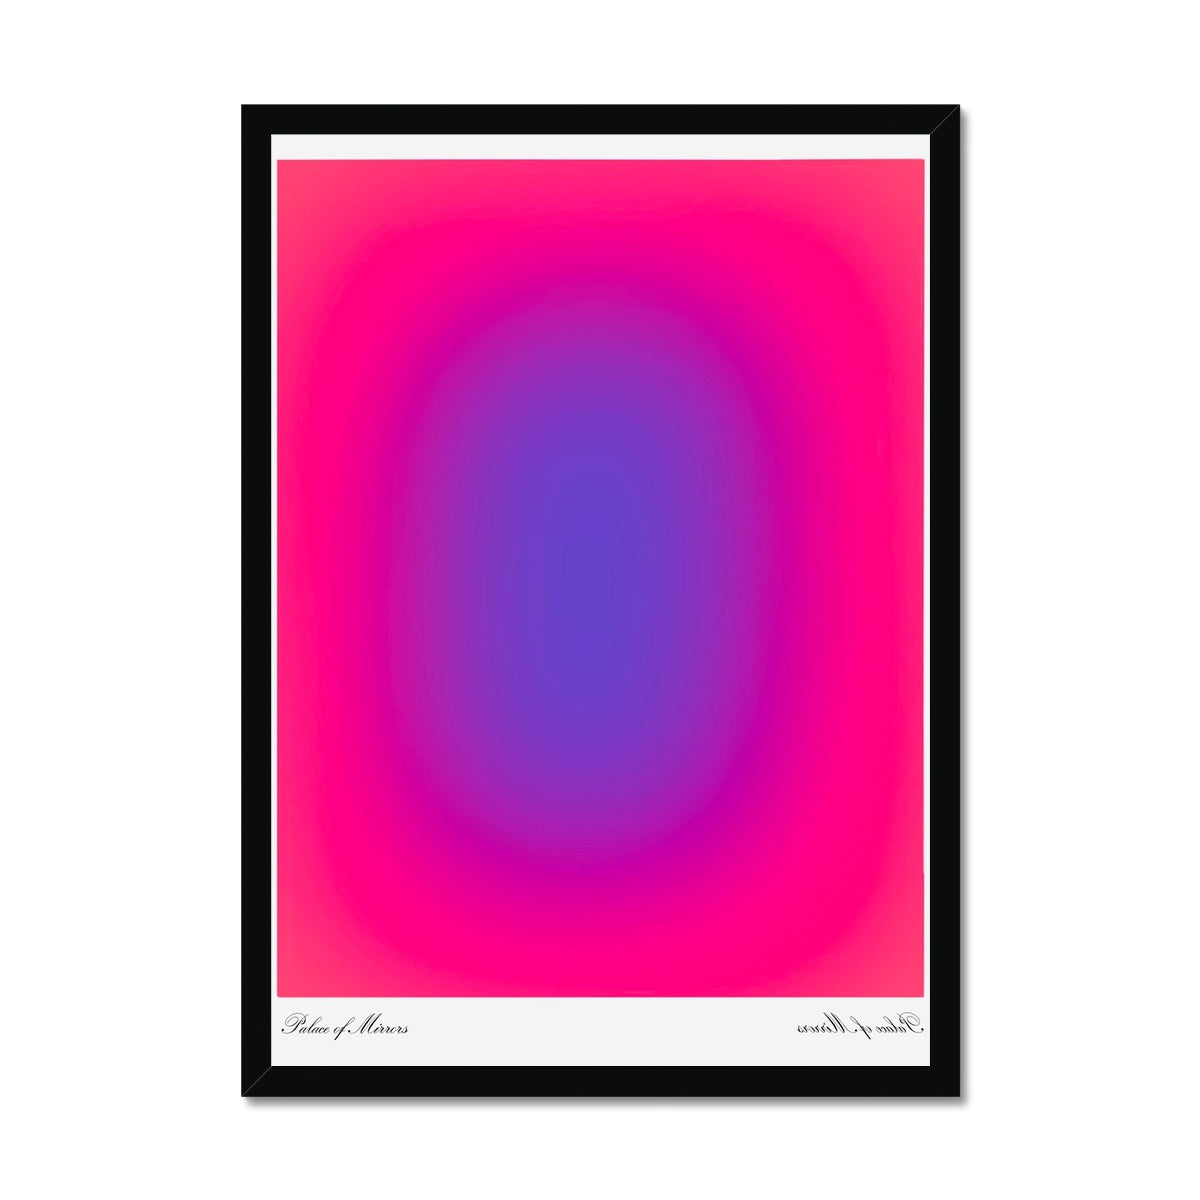 Dreamy gradient aura wall art prints featuring color clouds of pastel gradients. The rectangular layers of light and shadow appear to recede similar to an infinity mirror. Our colorful aura gradient posters are a stunning addition to any home.